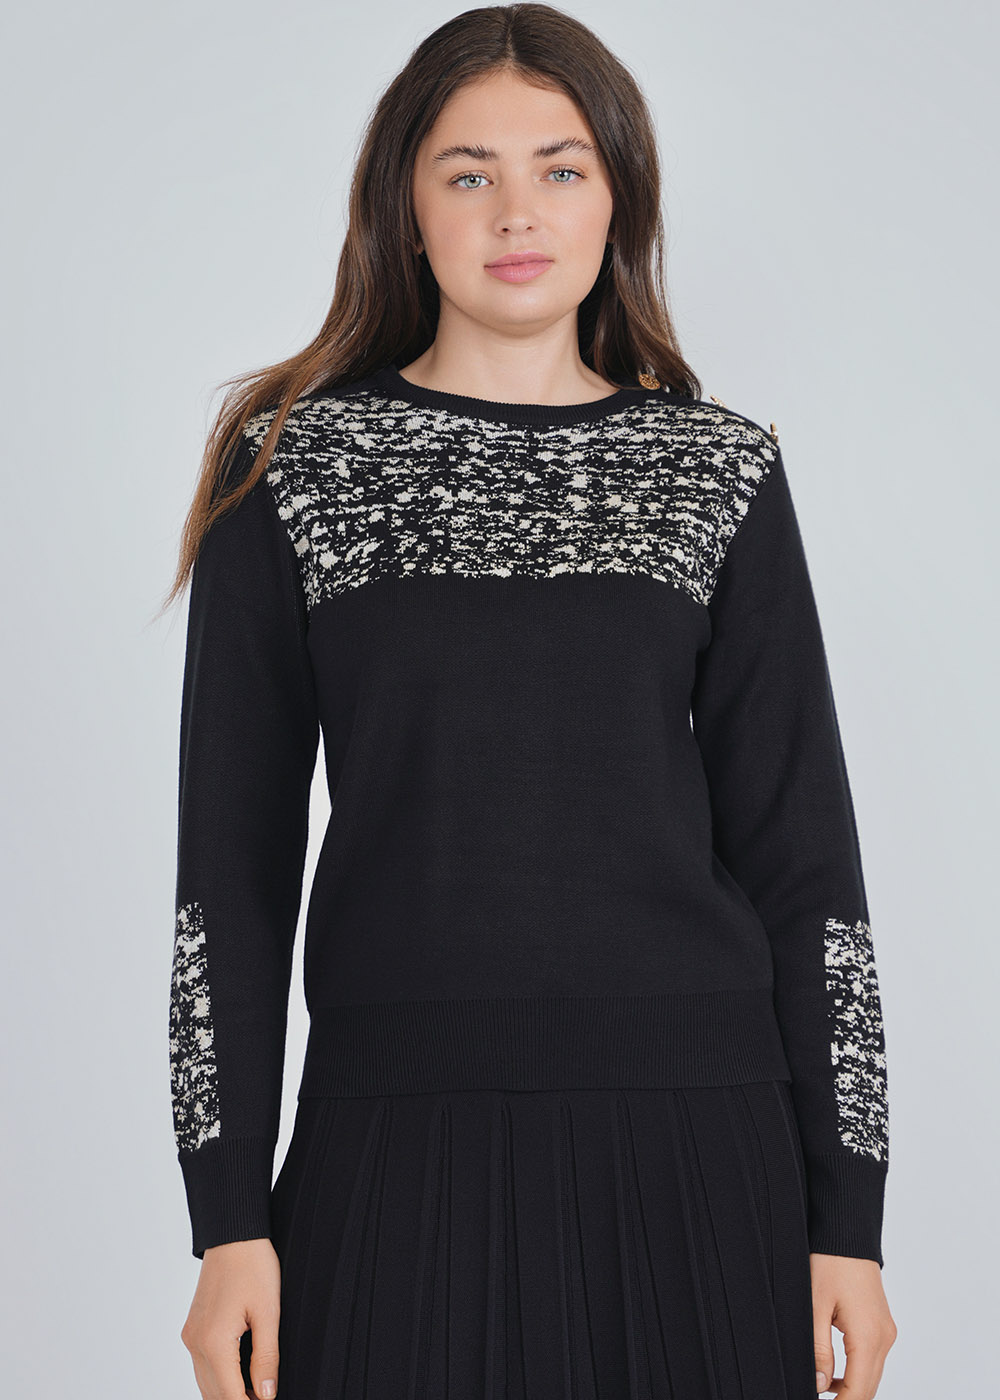 Black Knit Top with White Abstract Details